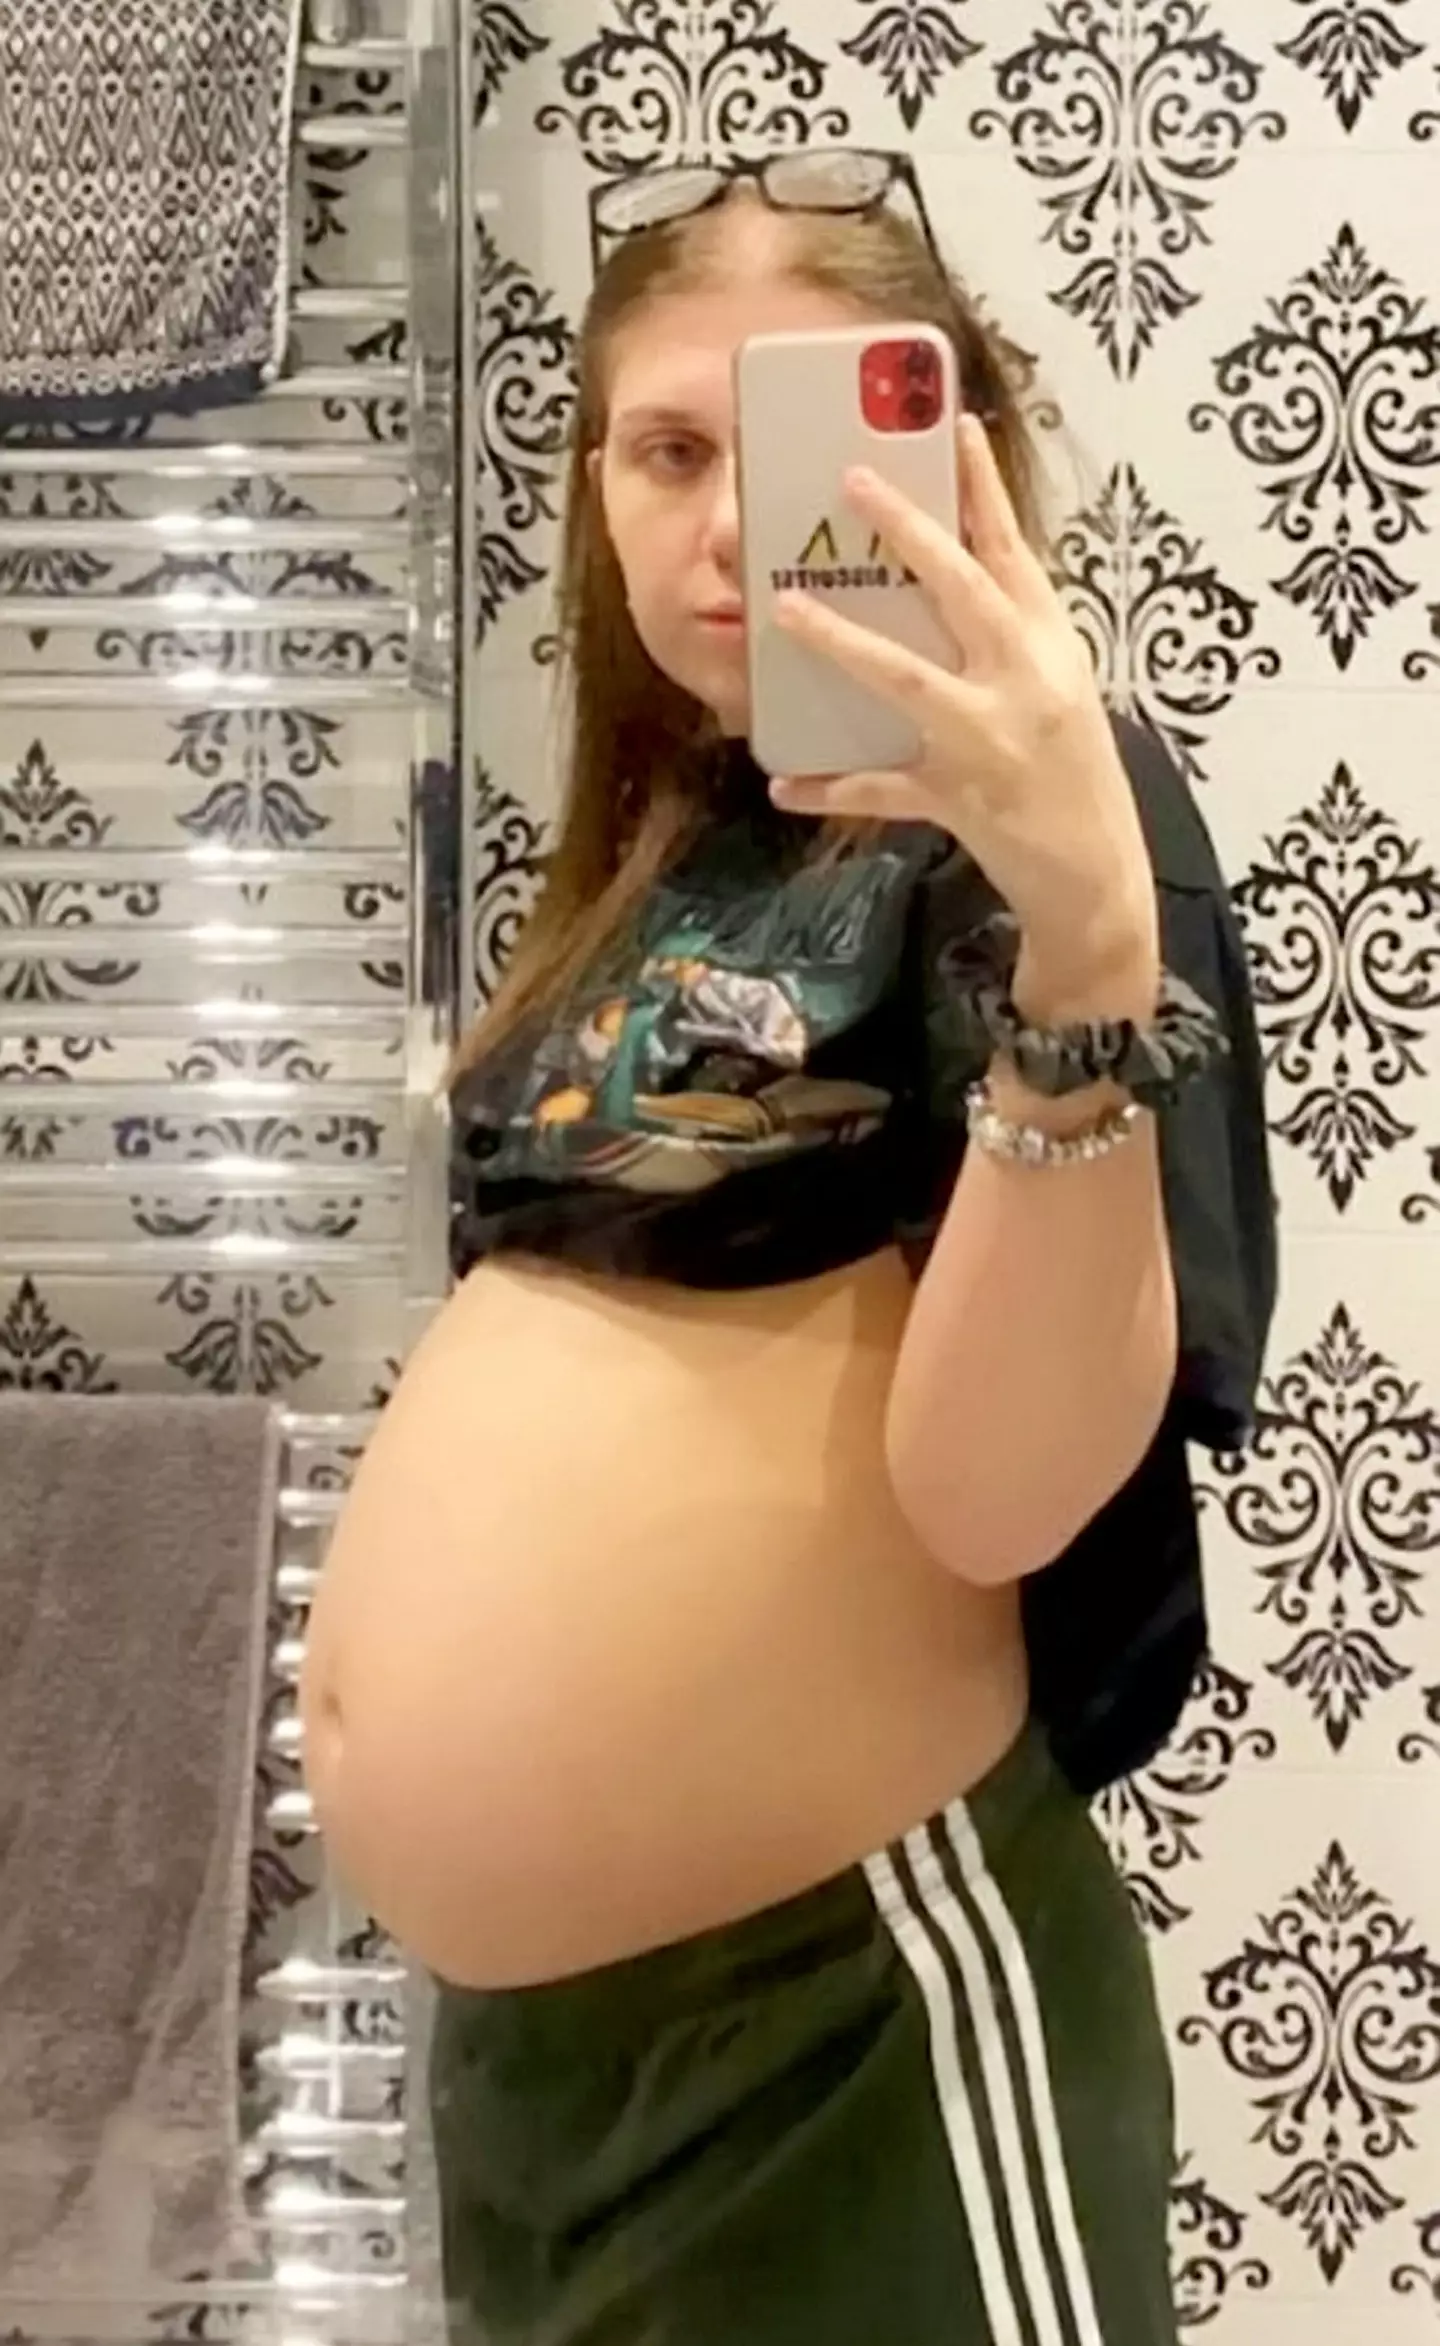 Hollie thought she was pregnant when her stomach started to grow.